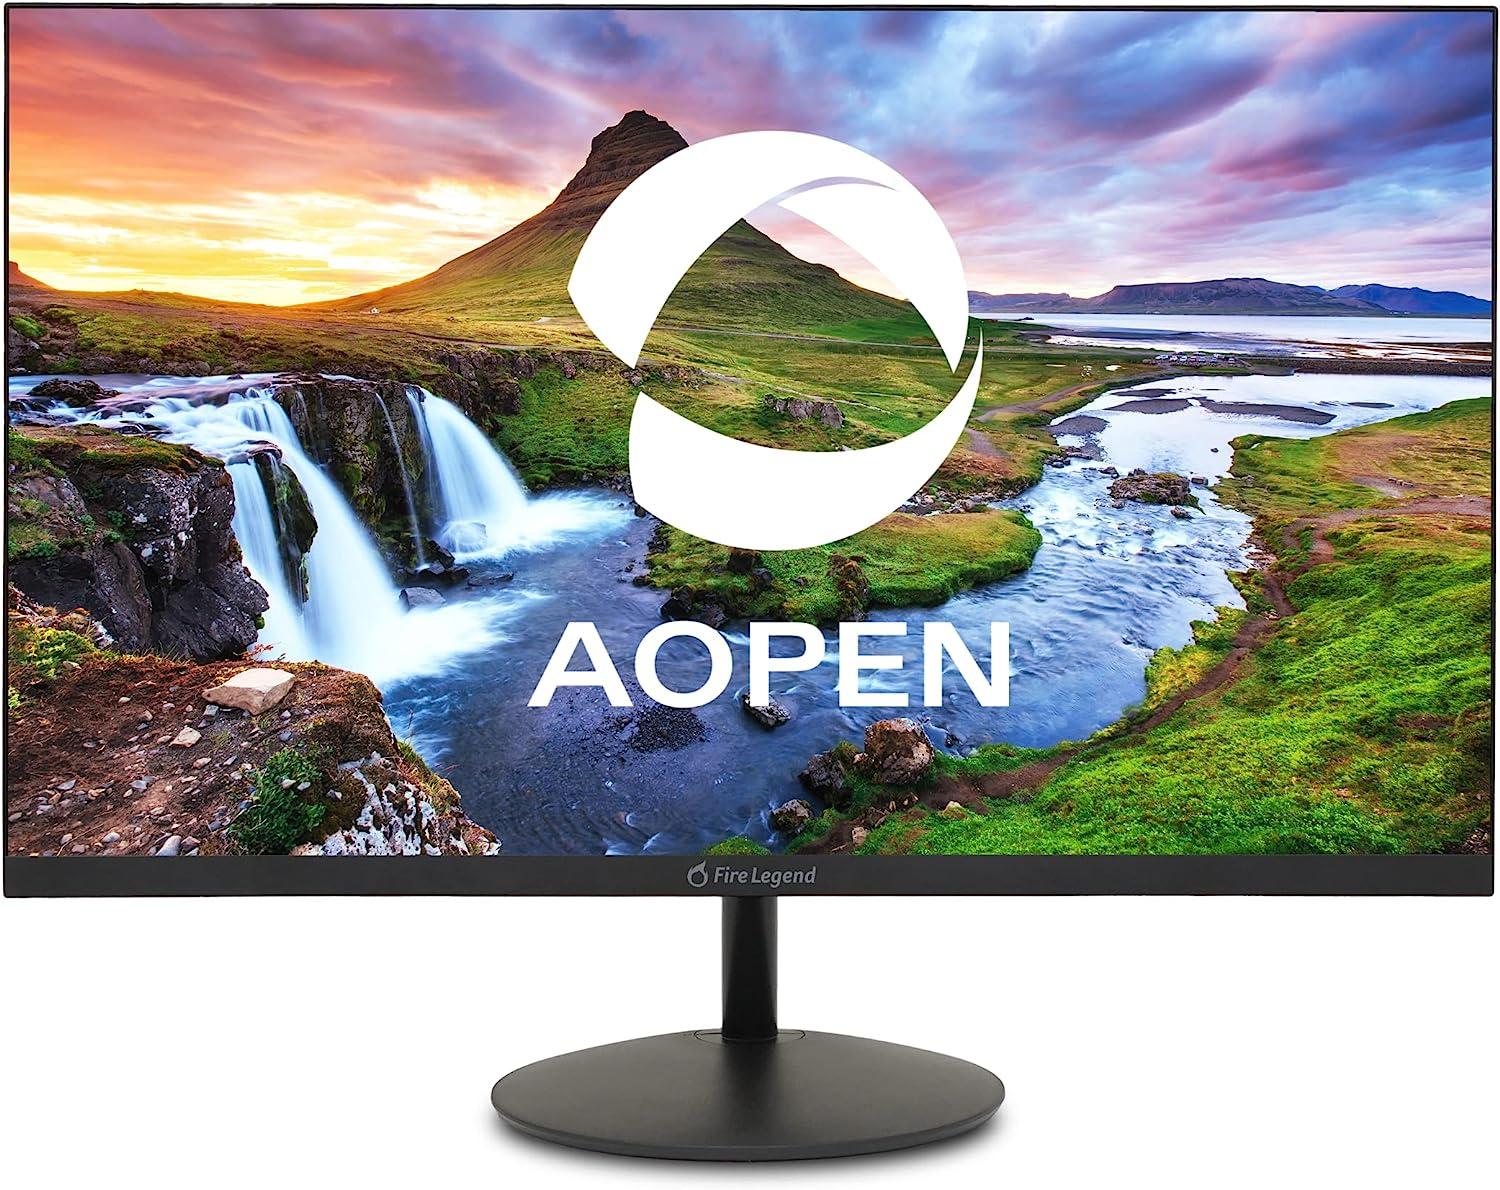 27in Aopen 27SA2 Ebi FHD 1080p 100Hz Gaming Monitor for $84.99 Shipped